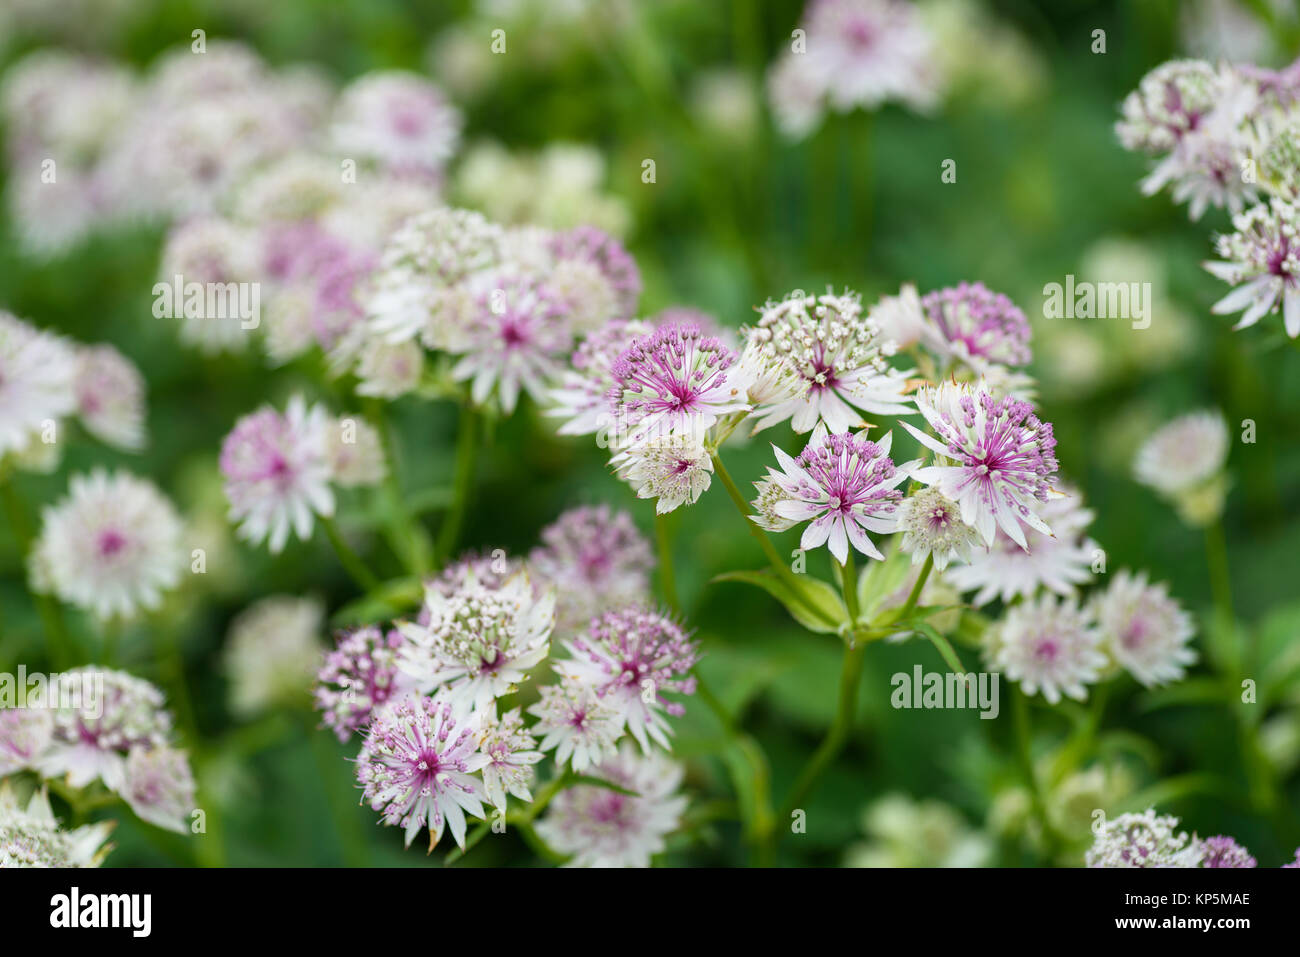 Close detail of pink Astrantia flowers blowing in the wind. Stock Photo